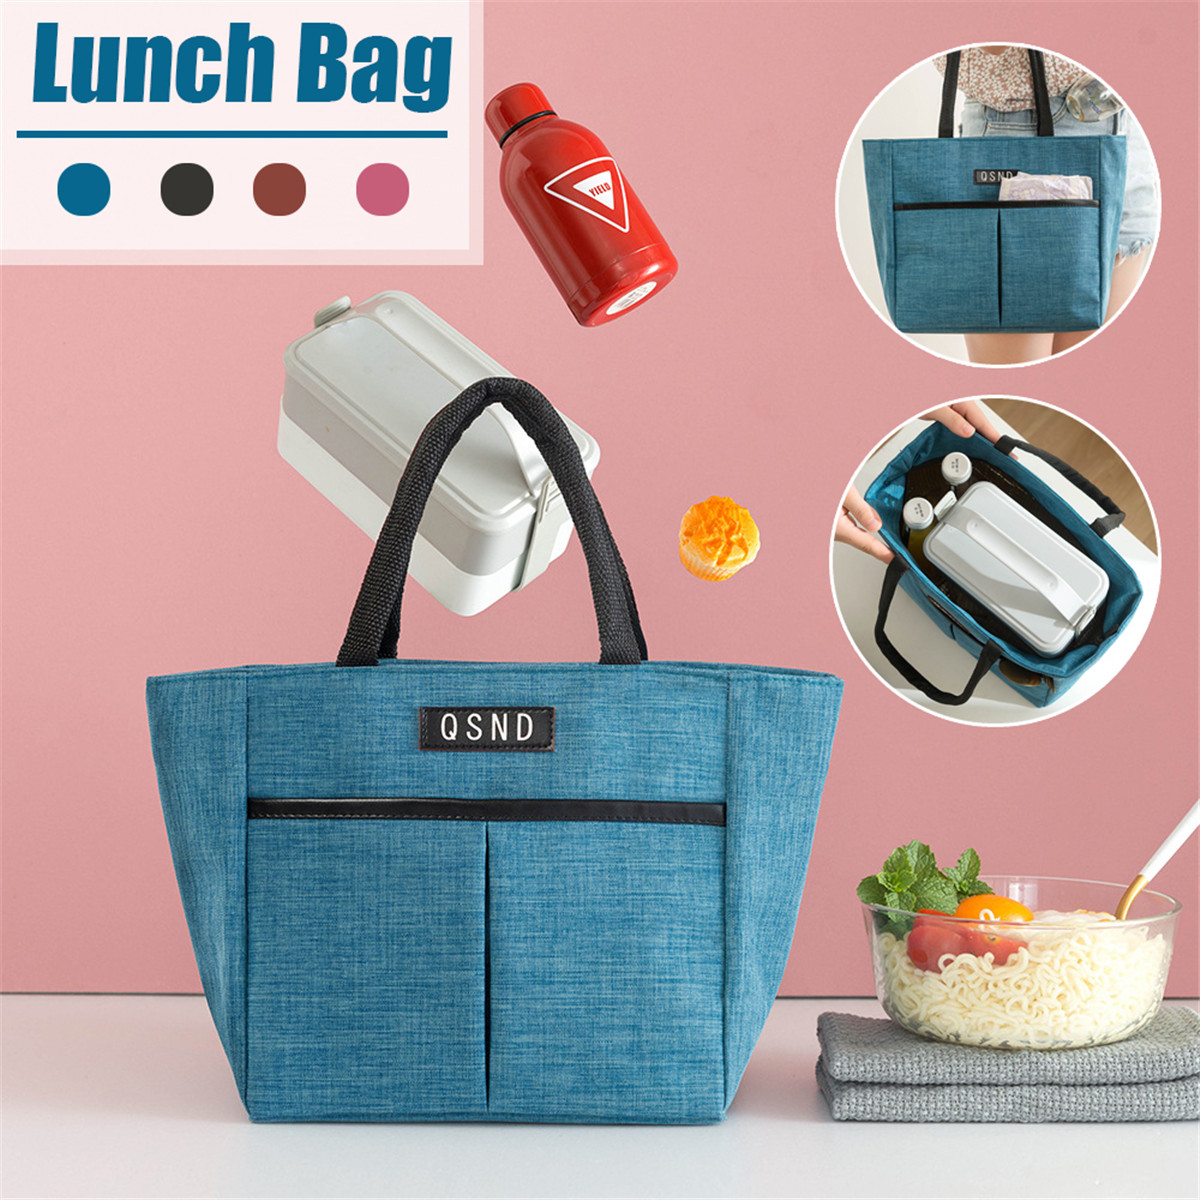 Portable-Insulated-Lunch-Bag-Lunch-Container-Cooler-Bag-Kids-Lunch-Box-Thermal-Case-Pouch-School-Foo-1761708-2